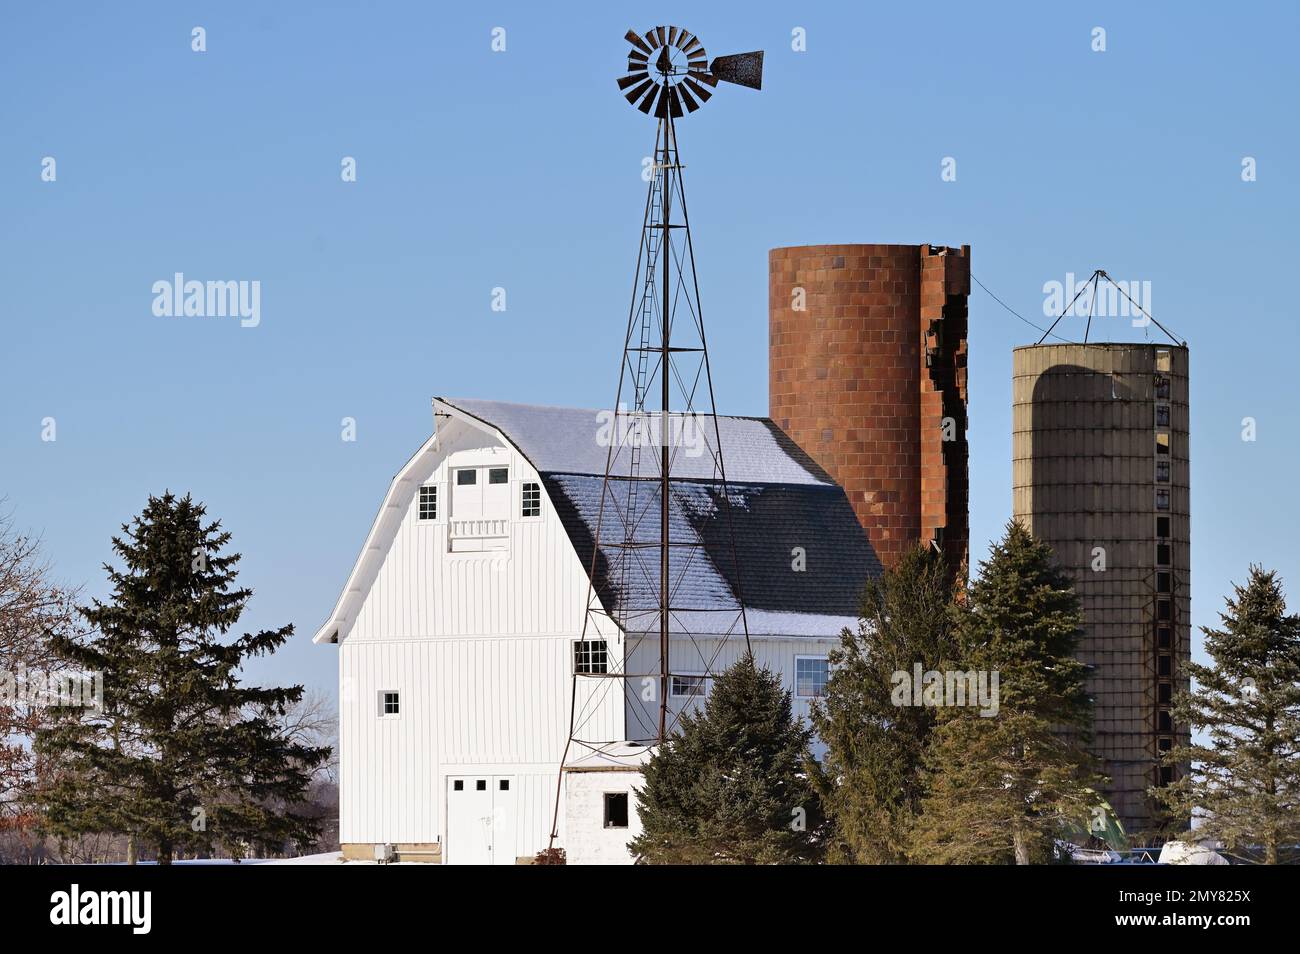 Maple Park, Illinois, USA. A barn along with its silos and windmill stand out from the snow on a bright winter day in northeastern Illinois. Stock Photo